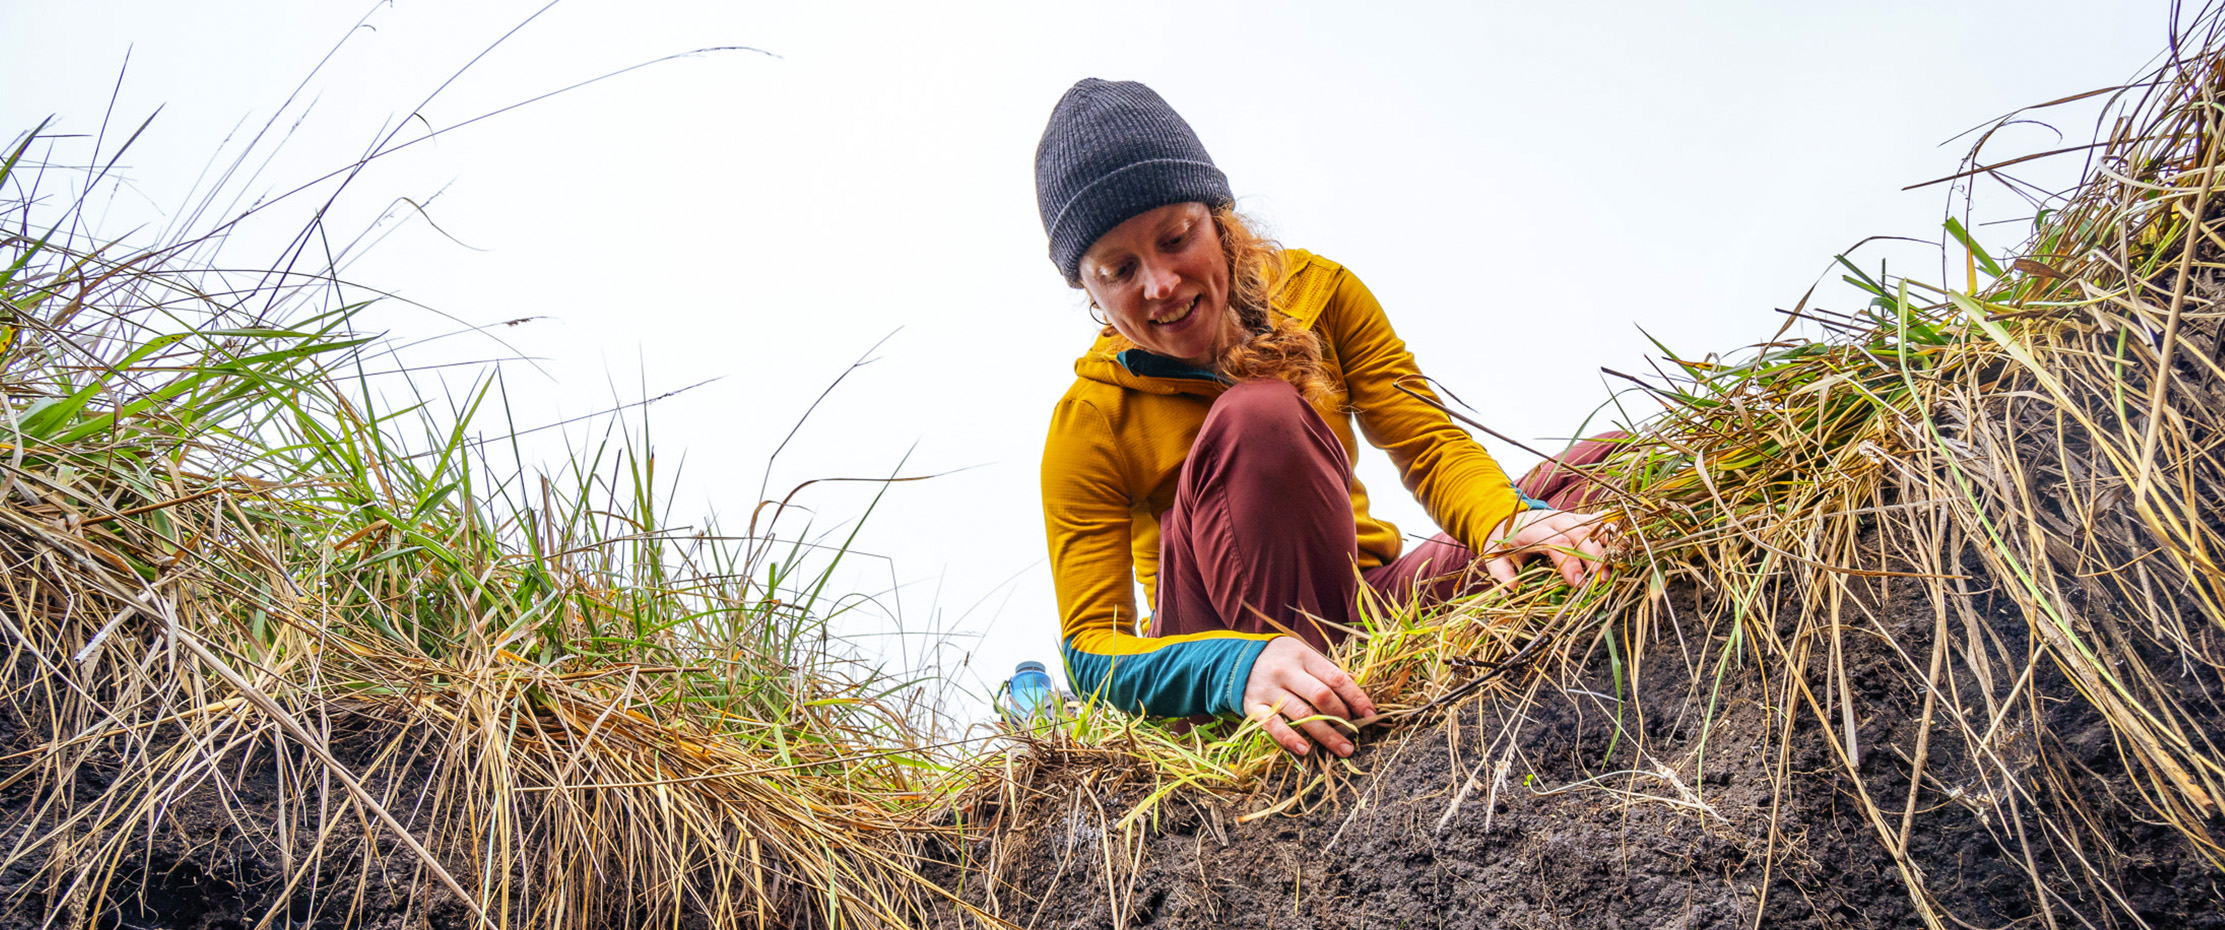 A female scientist peers enthusiastically into a soil pit, with roots and microbes showing in the cutaway dirt